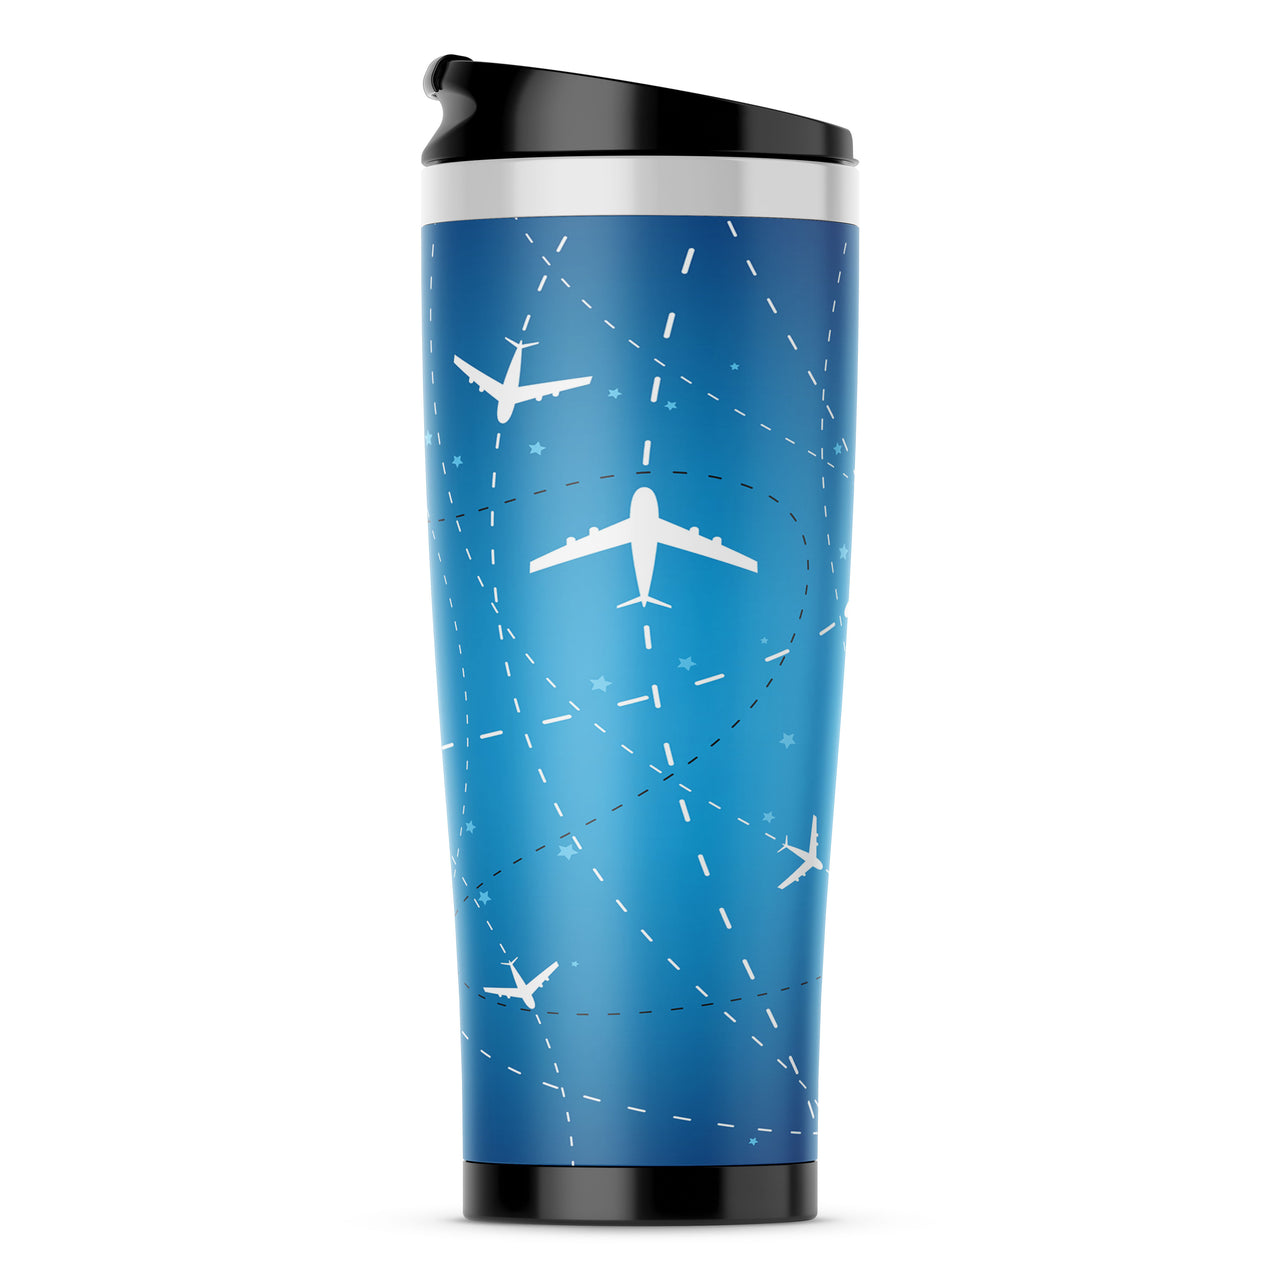 Travelling with Aircraft Designed Travel Mugs